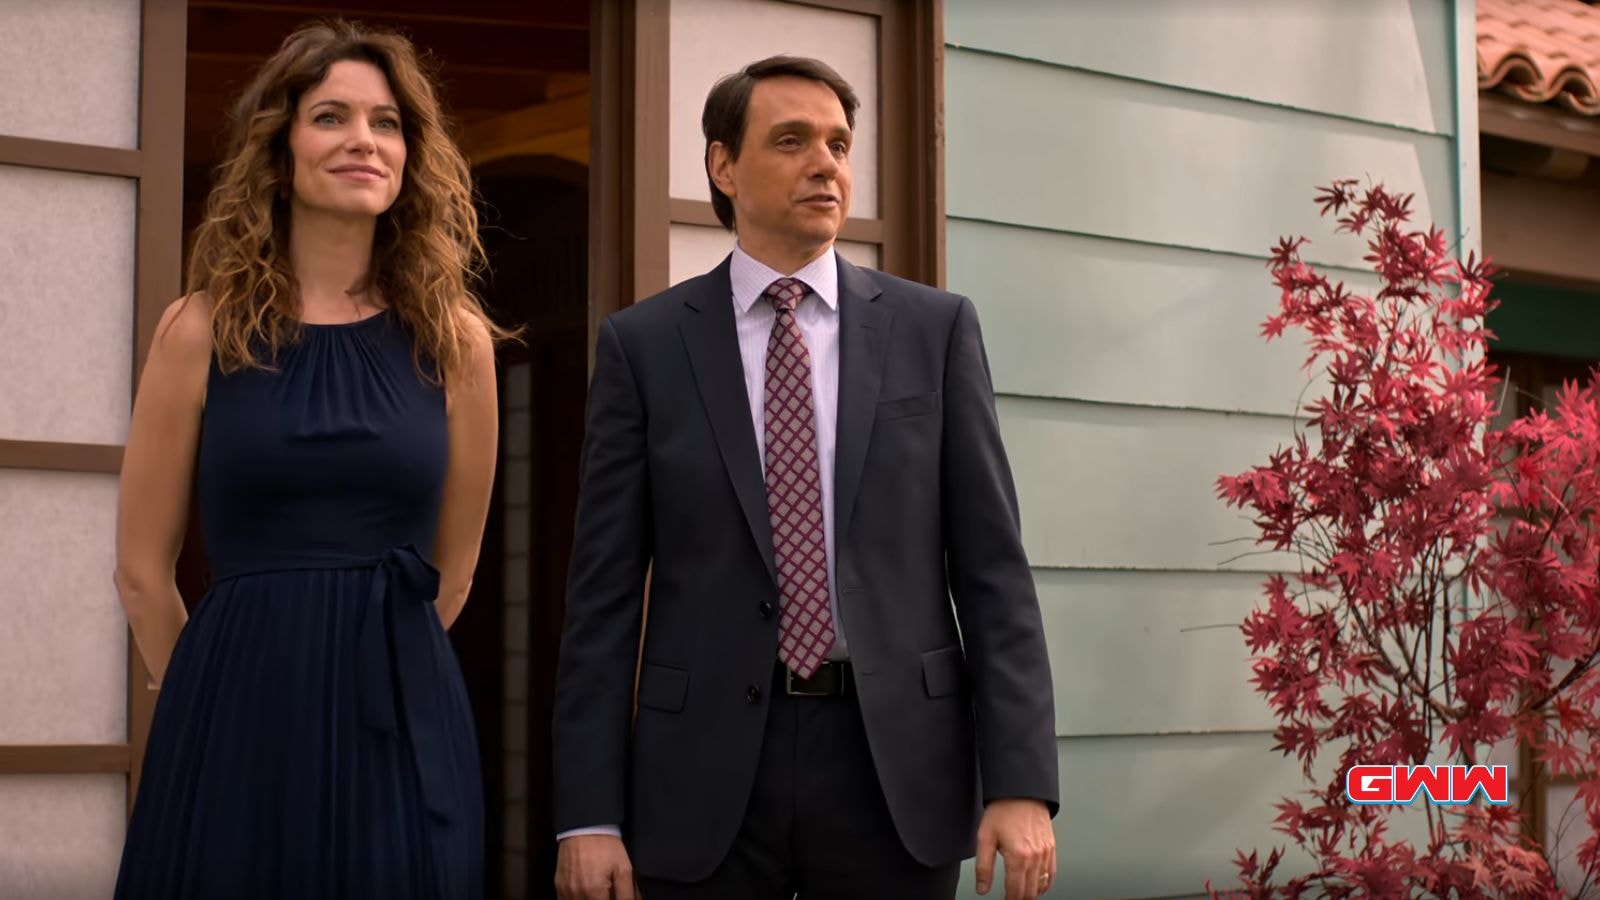 Amanda in a blue dress and Daniel in a suit standing outside.